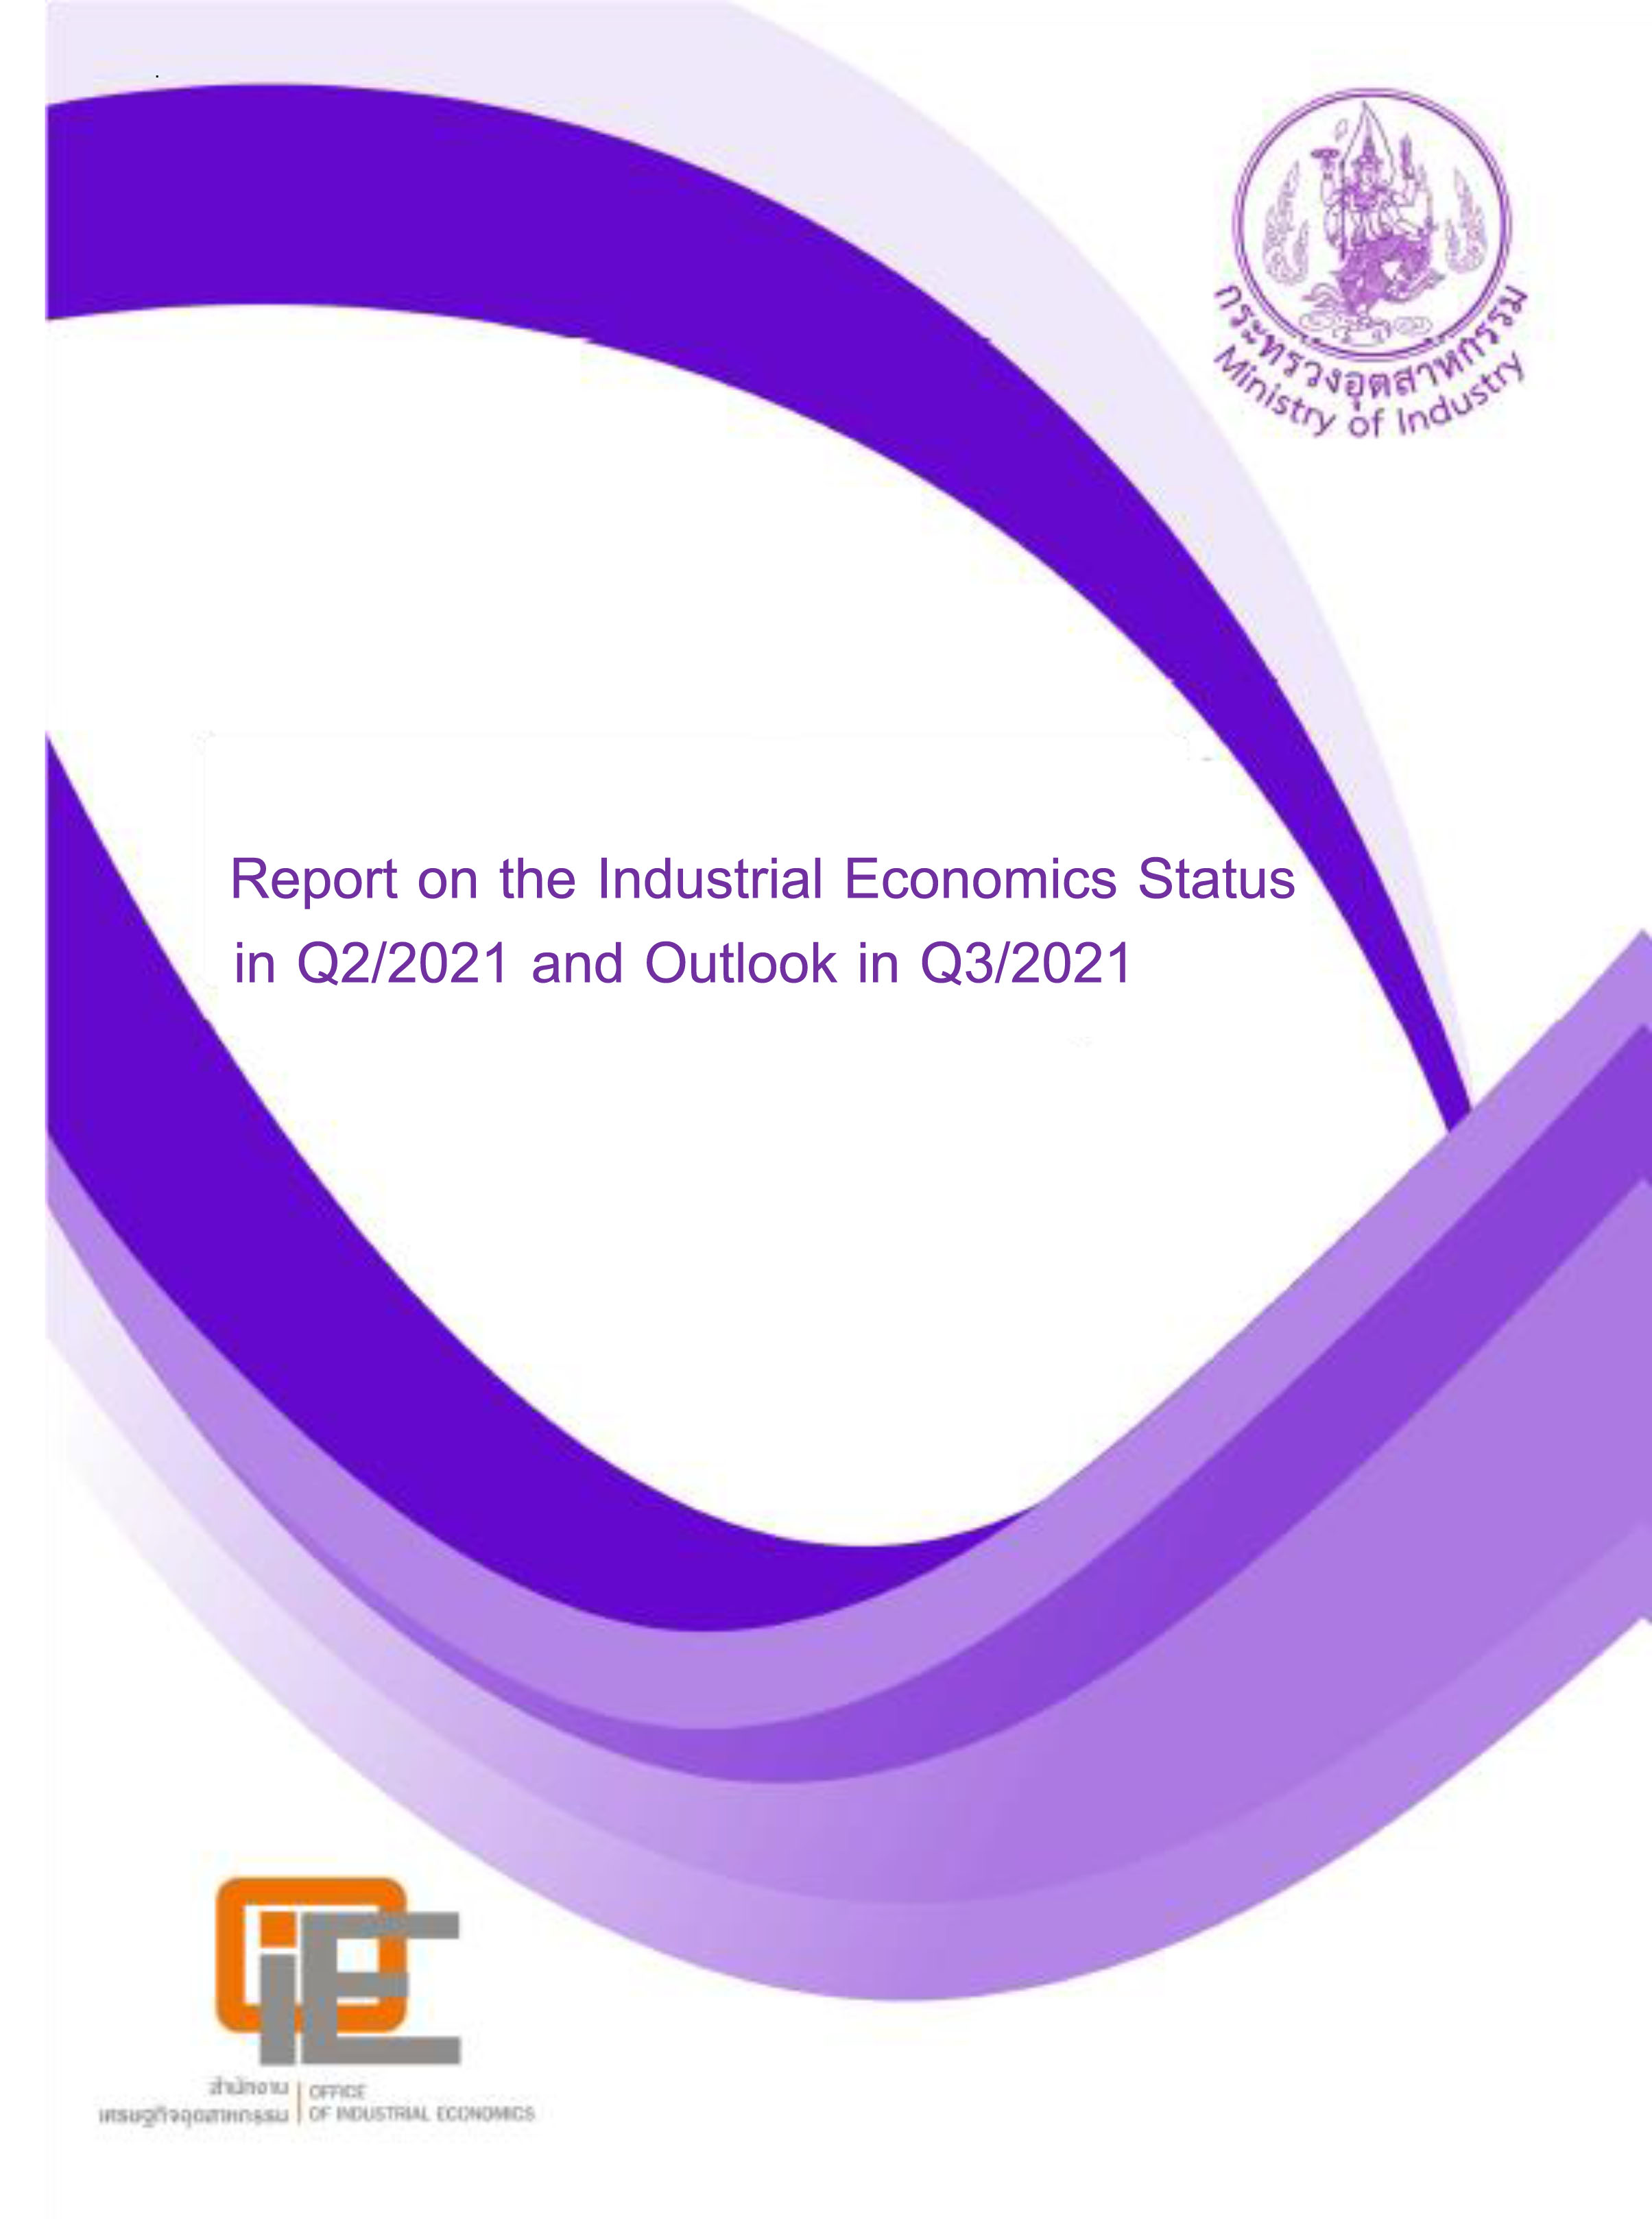 Report on the Industrial Economics Status in Q2/2021 and Outlook for Q3/2021